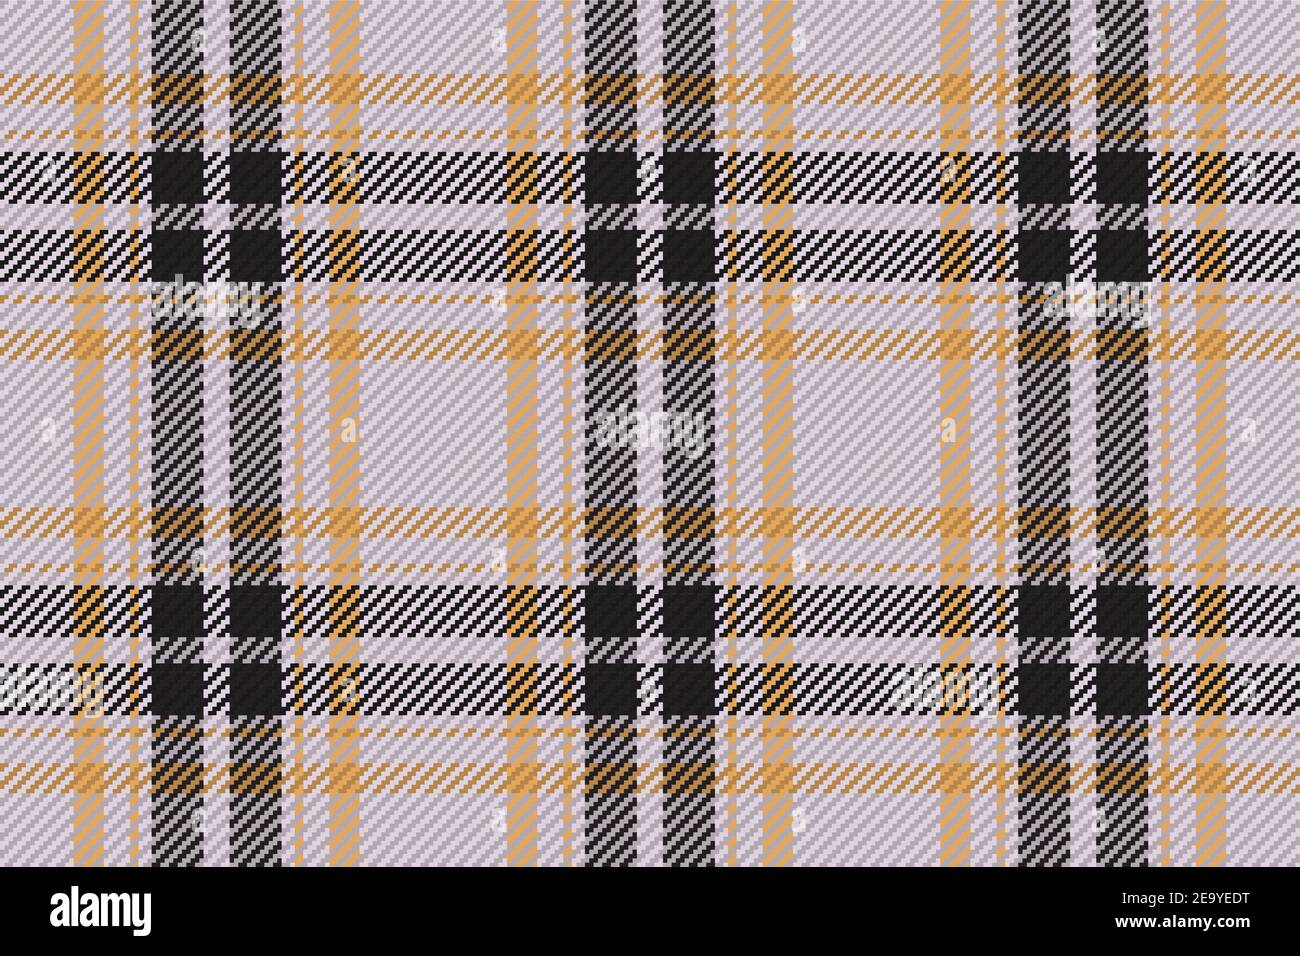 Tartan Plaid Seamless Pattern Robin Egg Blue Background Flannel Shirts  Vector Illustration For Wallpapers Green Cream Red Line Color Fabric  Texture Scottish Cage Stock Illustration - Download Image Now - iStock